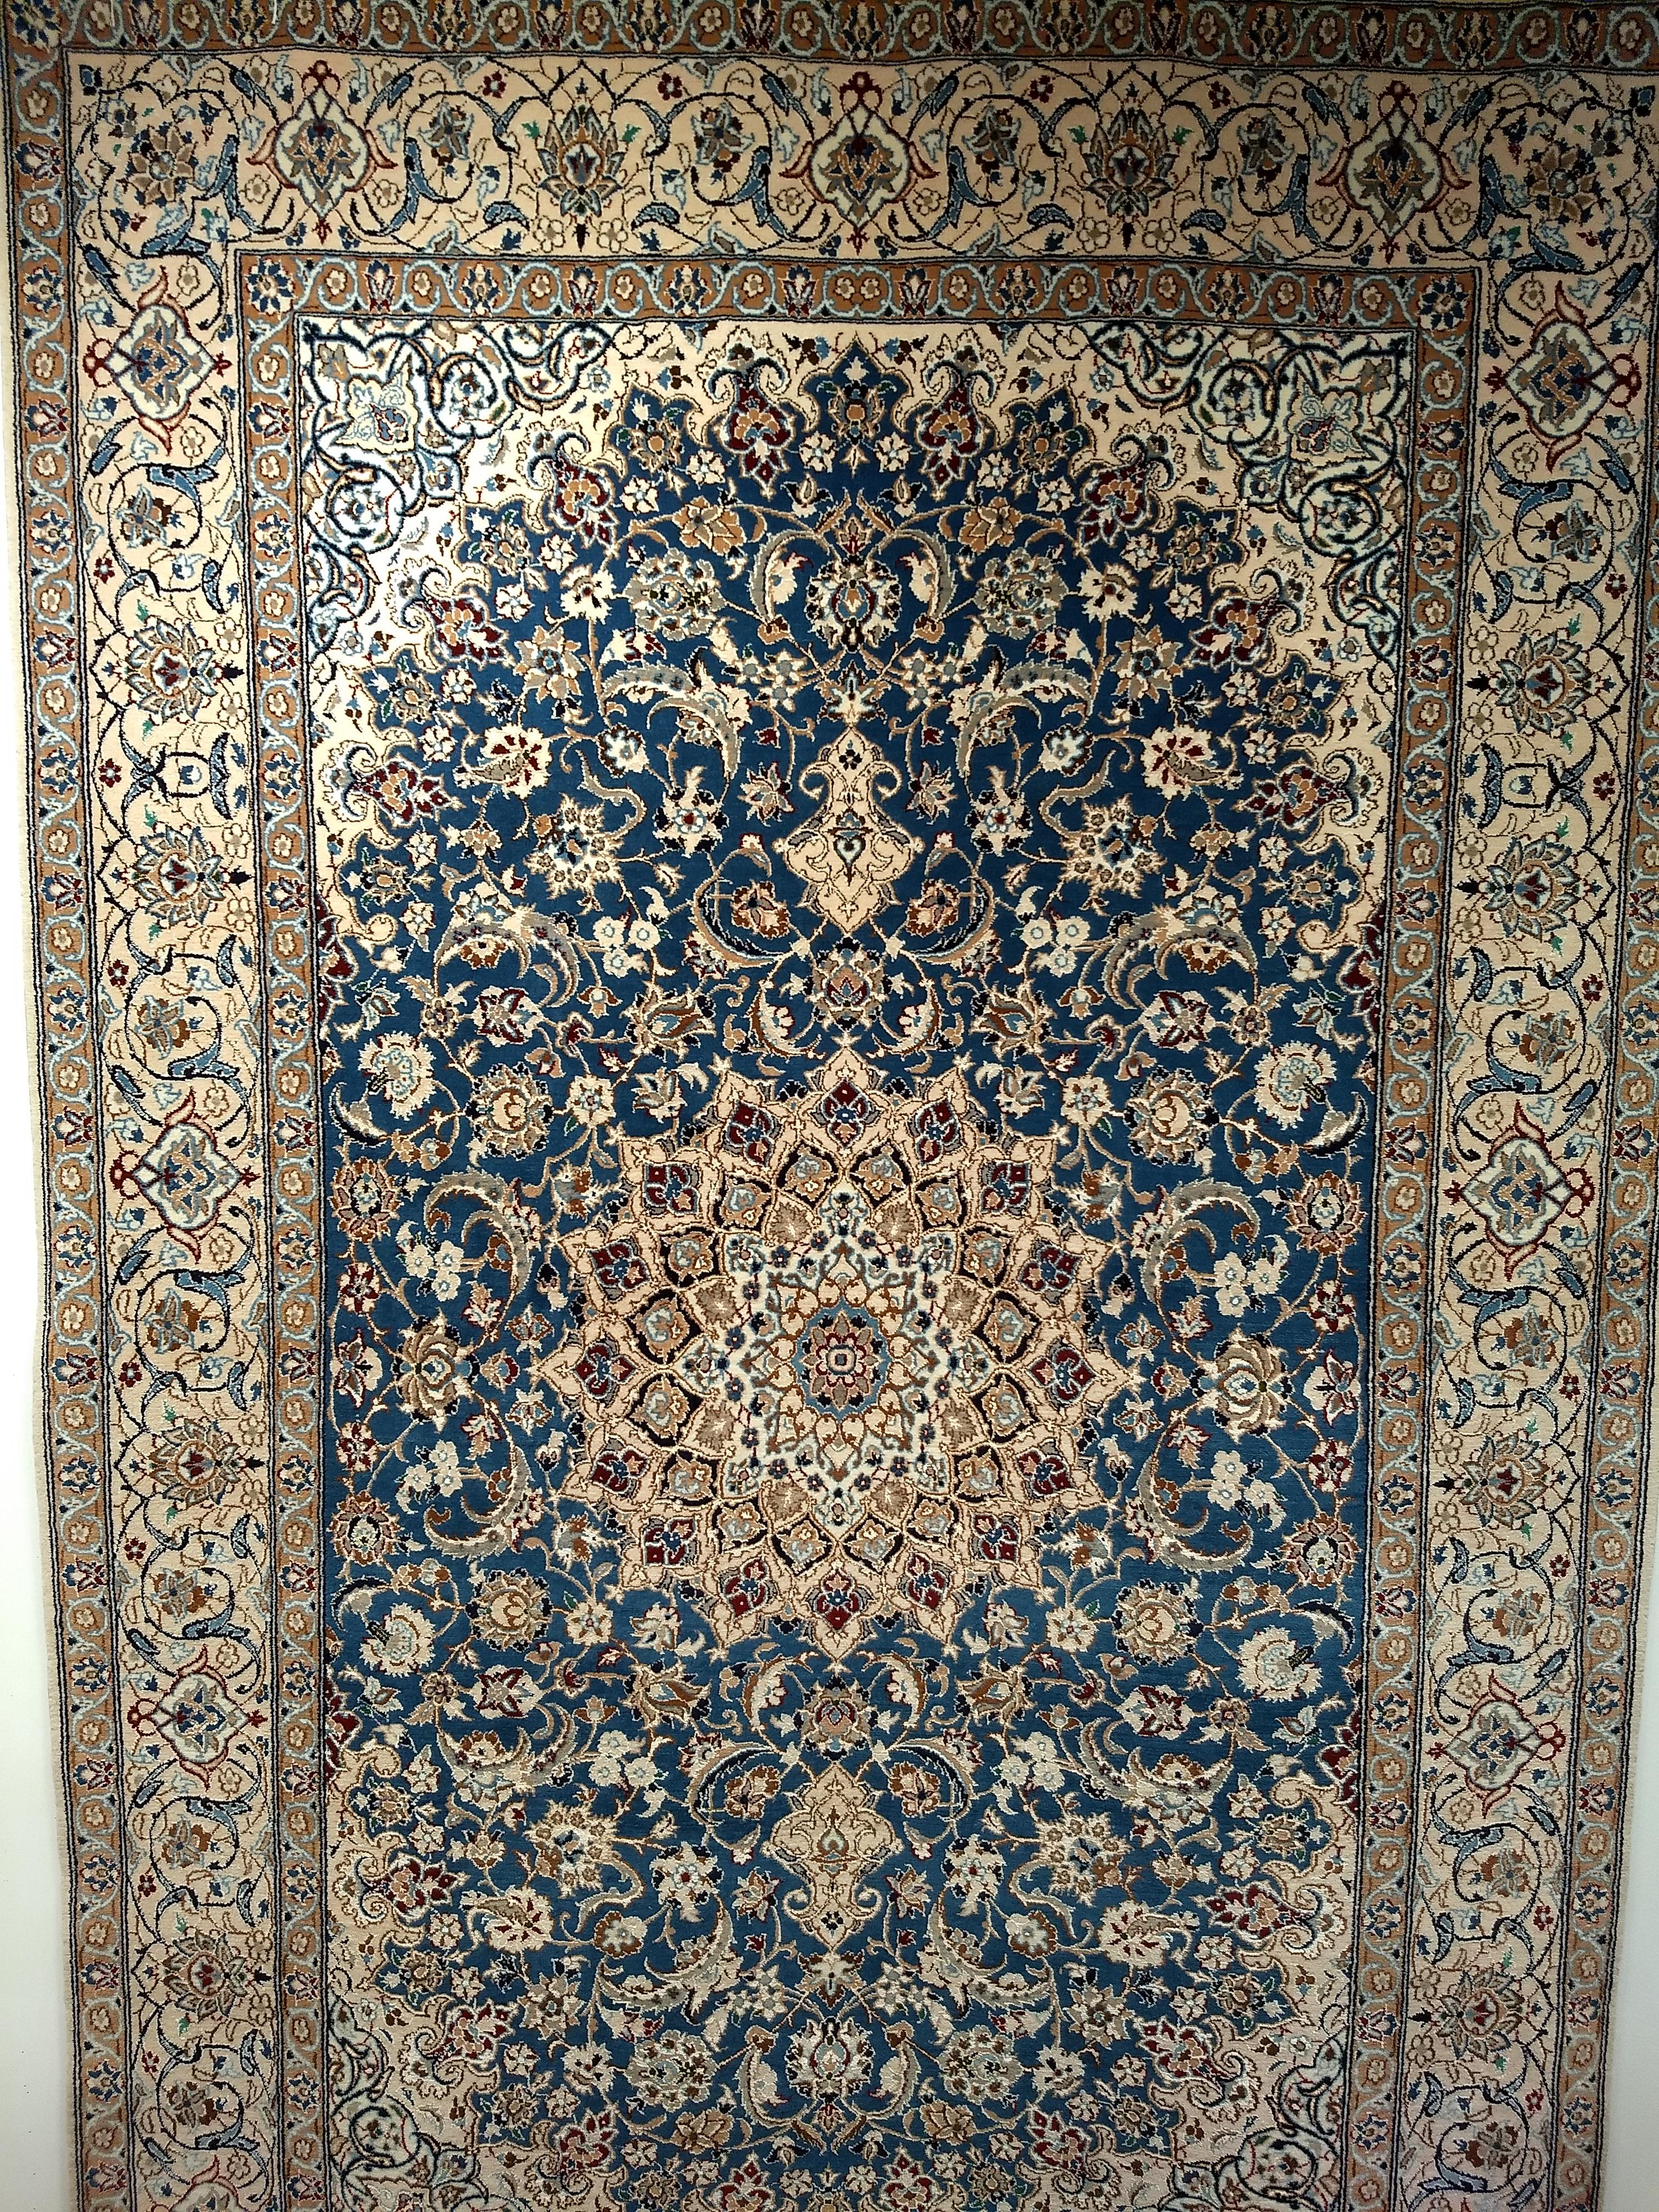 A beautiful Persian Nain room-size rug in a very rare French blue color and cream colors with silk highlights from the 3rd quarter of the 1900s.  The Nain rug has a beautiful central medallion set in a French blue field with designs in caramel,